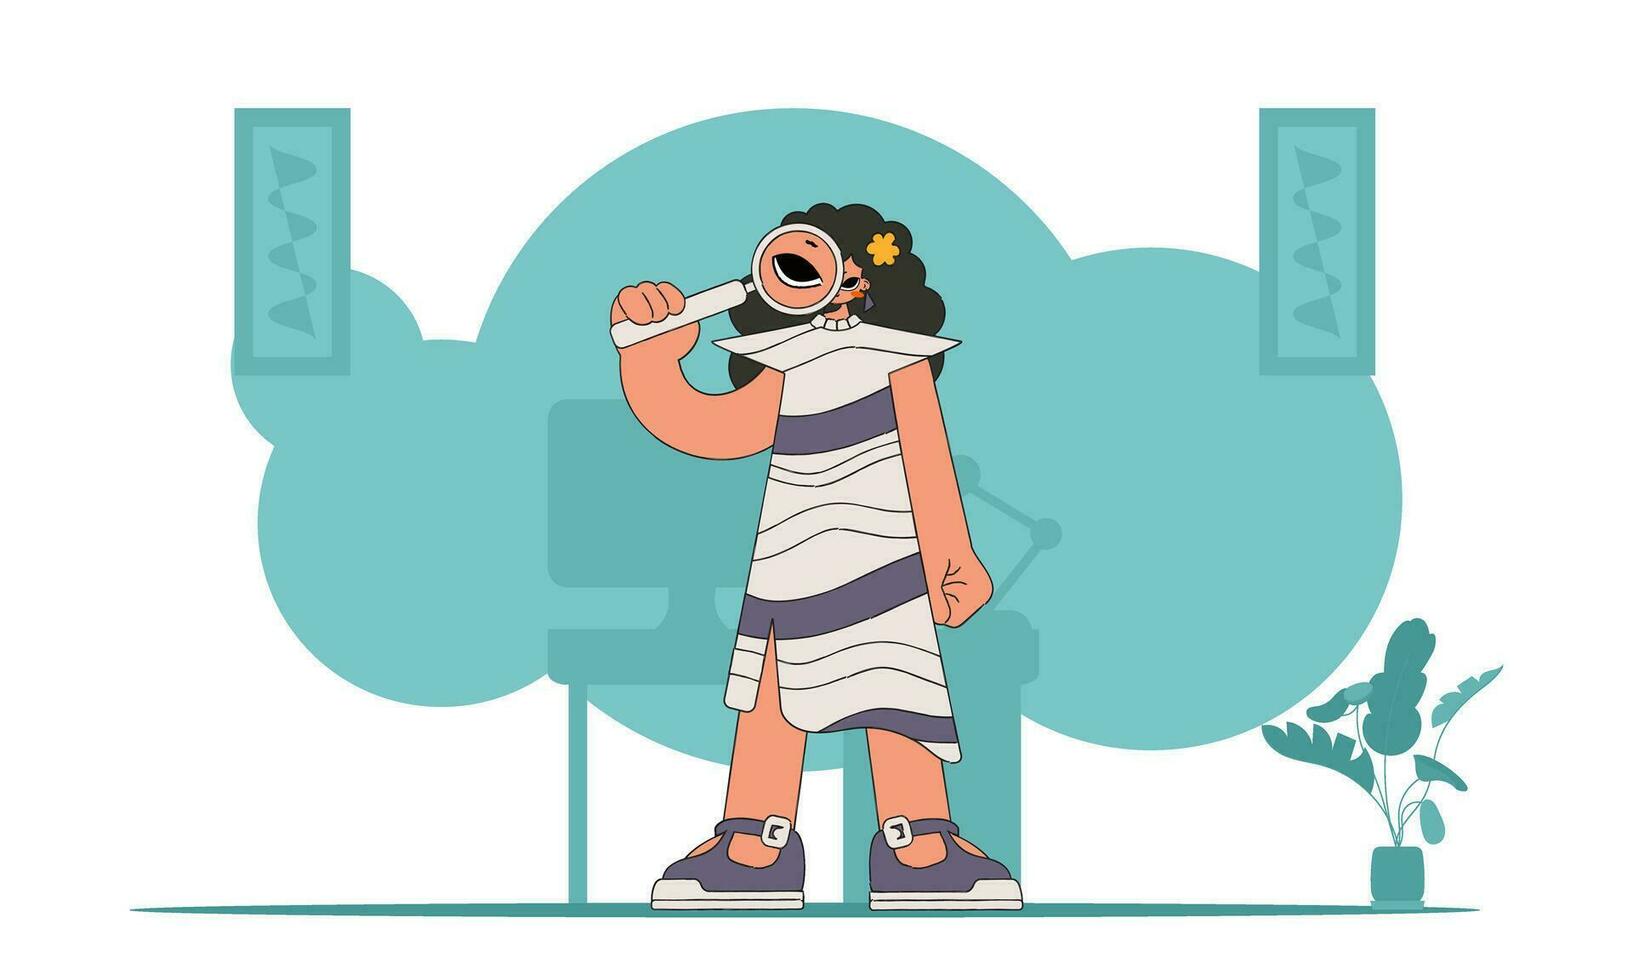 The concept of searching for information. The guy is holding a magnifying glass. Linear retro style character. vector